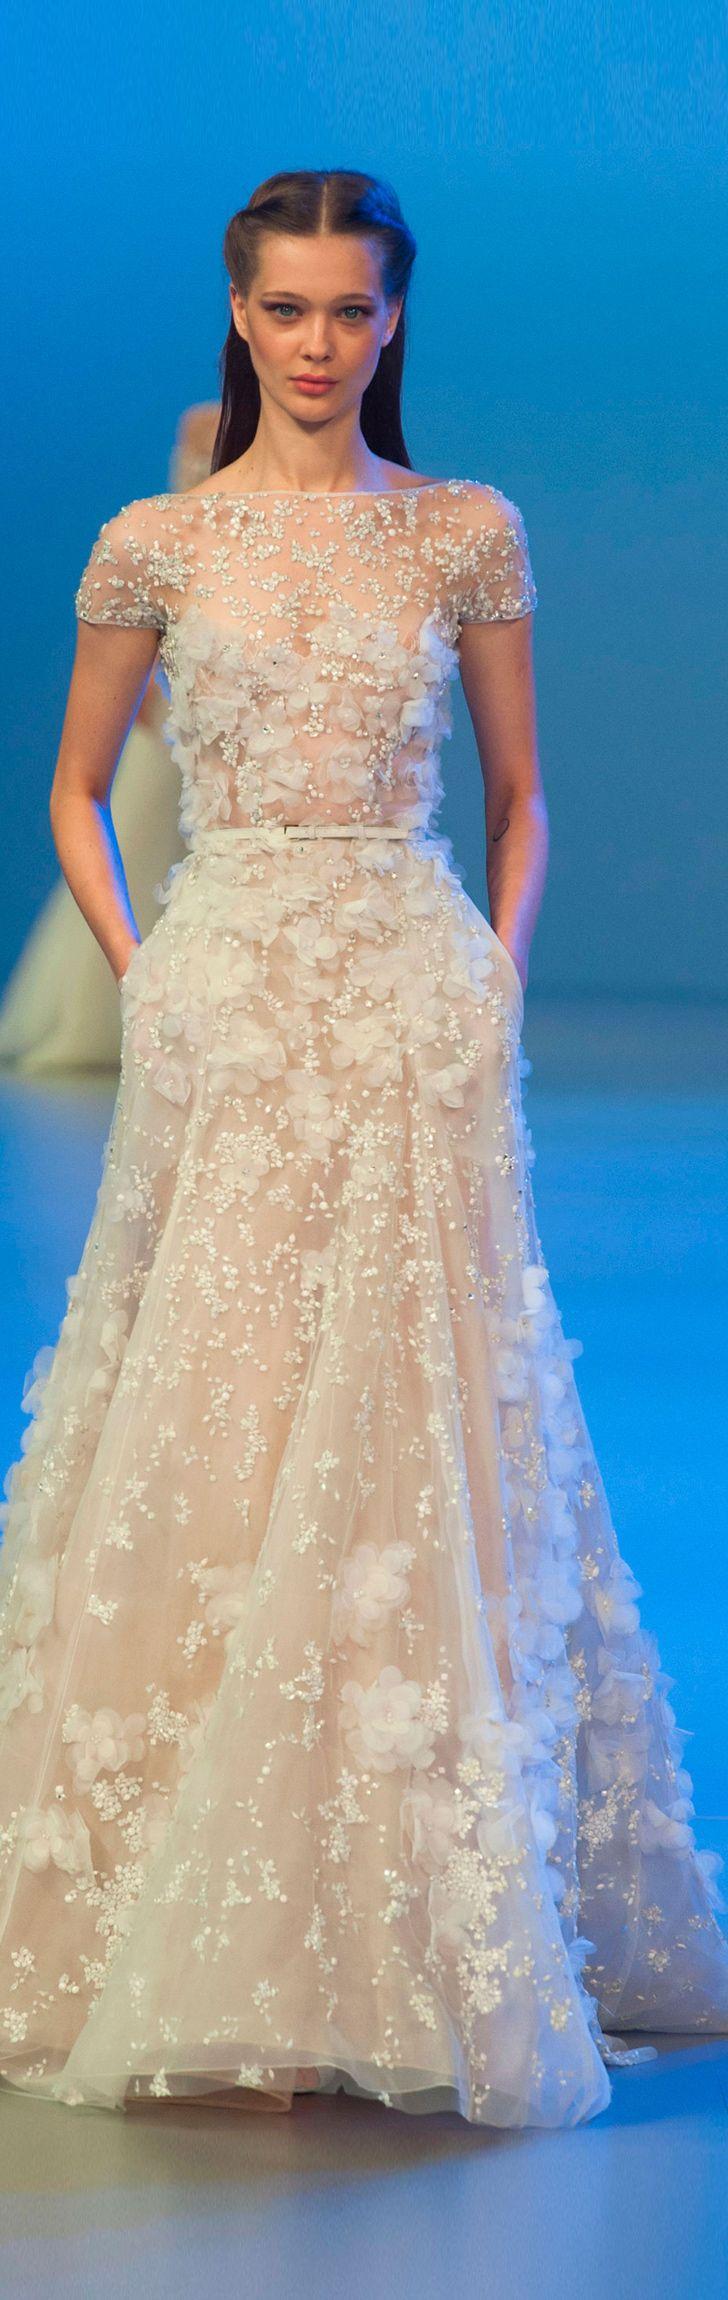 Wedding - 25 Couture Looks We Pinned To Our Mental Wedding Dress Board